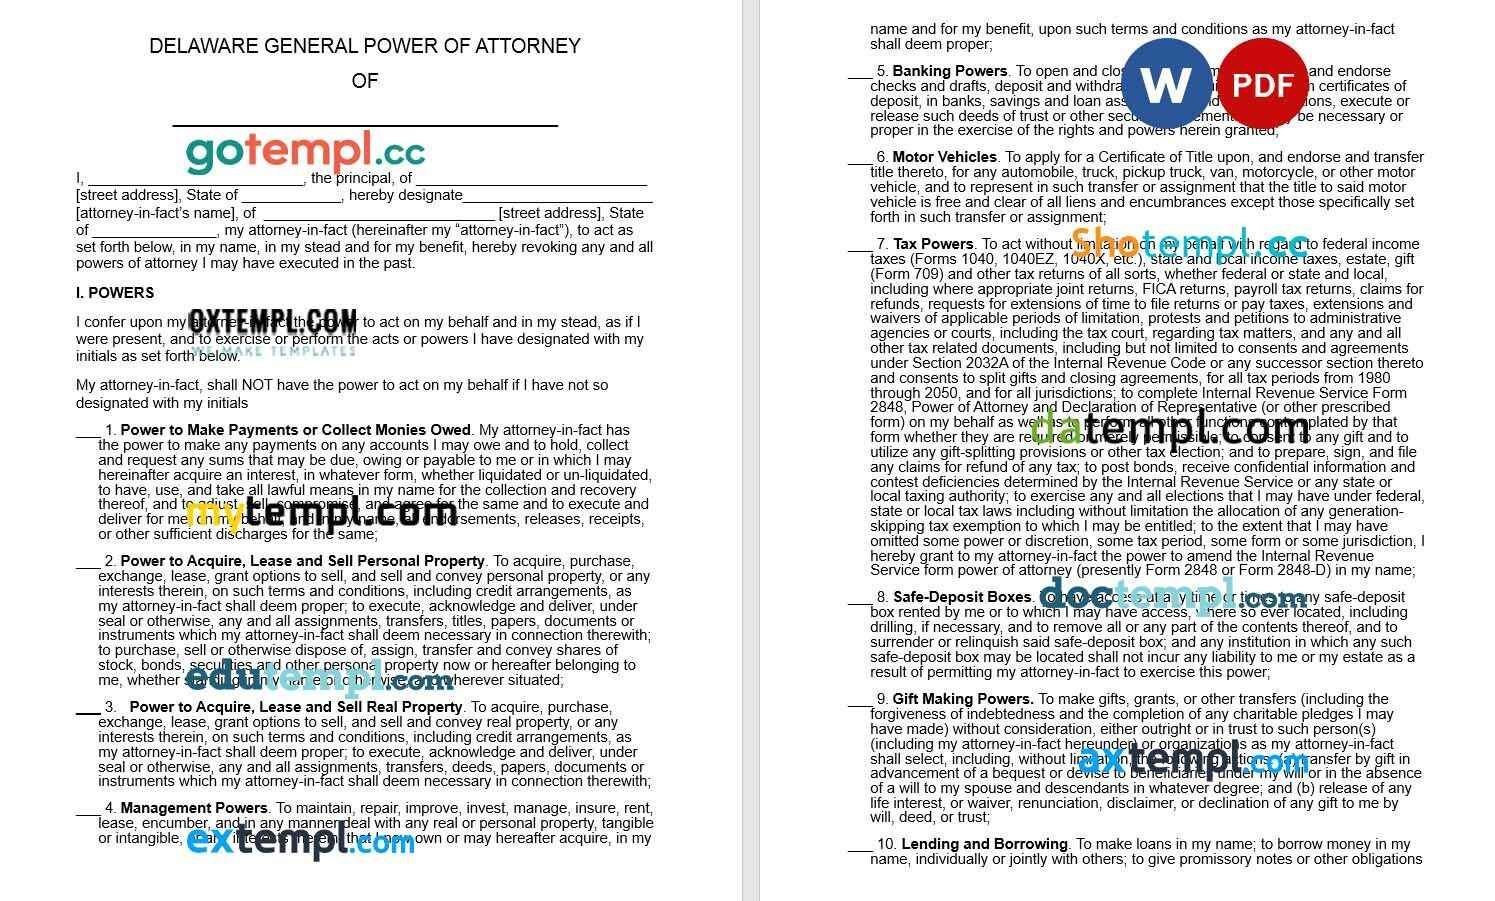 Delaware General Power of Attorney example, fully editable